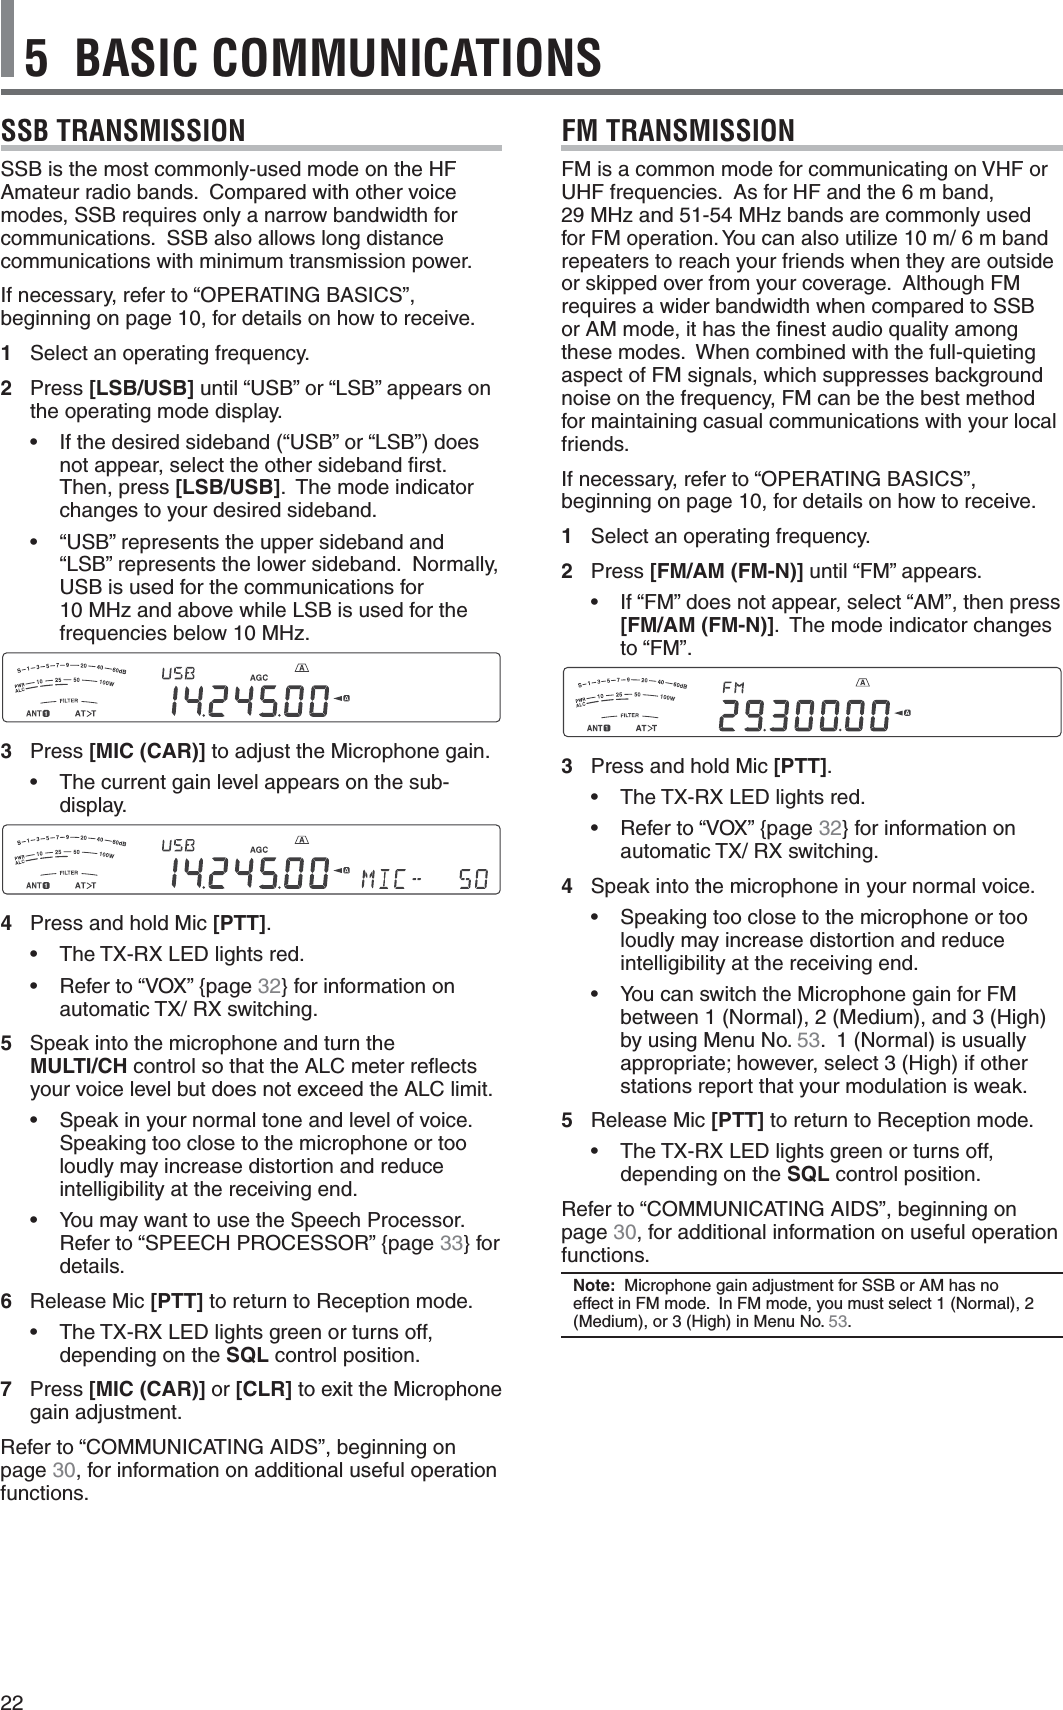 225  BASIC COMMUNICATIONSSSB TRANSMISSIONSSB is the most commonly-used mode on the HF Amateur radio bands.  Compared with other voice modes, SSB requires only a narrow bandwidth for communications.  SSB also allows long distance communications with minimum transmission power.If necessary, refer to “OPERATING BASICS”, beginning on page 10, for details on how to receive.1 Select an operating frequency.2 Press [LSB/USB] until “USB” or “LSB” appears on the operating mode display.s )FTHEDESIREDSIDEBANDh53&quot;vORh,3&quot;vDOESnot appear, select the other sideband ﬁrst.  Then, press [LSB/USB].  The mode indicator changes to your desired sideband.s h53&quot;vREPRESENTSTHEUPPERSIDEBANDAND“LSB” represents the lower sideband.  Normally, USB is used for the communications for  10 MHz and above while LSB is used for the frequencies below 10 MHz.3 Press [MIC (CAR)] to adjust the Microphone gain.s 4HECURRENTGAINLEVELAPPEARSONTHESUBdisplay.4  Press and hold Mic [PTT].s 4HE4828,%$LIGHTSREDs 2EFERTOh6/8v[PAGE32} for information on AUTOMATIC4828SWITCHING5 Speak into the microphone and turn the  MULTI/CH control so that the ALC meter reﬂects your voice level but does not exceed the ALC limit.s 3PEAKINYOURNORMALTONEANDLEVELOFVOICESpeaking too close to the microphone or too loudly may increase distortion and reduce intelligibility at the receiving end.s 9OUMAYWANTTOUSETHE3PEECH0ROCESSOR2EFERTOh30%%#(02/#%33/2v[PAGE33} for details.6 Release Mic [PTT] to return to Reception mode.s 4HE4828,%$LIGHTSGREENORTURNSOFFdepending on the SQL control position.7 Press [MIC (CAR)] or [CLR] to exit the Microphone gain adjustment.2EFERTOh#/--5.)#!4).&apos;!)$3vBEGINNINGONpage 30, for information on additional useful operation functions.FM TRANSMISSION&amp;-ISACOMMONMODEFORCOMMUNICATINGON6(&amp;ORUHF frequencies.  As for HF and the 6 m band,  29 MHz and 51-54 MHz bands are commonly used FOR&amp;-OPERATION9OUCANALSOUTILIZEMMBANDrepeaters to reach your friends when they are outside or skipped over from your coverage.  Although FM requires a wider bandwidth when compared to SSB or AM mode, it has the ﬁnest audio quality among these modes.  When combined with the full-quieting aspect of FM signals, which suppresses background noise on the frequency, FM can be the best method for maintaining casual communications with your local friends.If necessary, refer to “OPERATING BASICS”, beginning on page 10, for details on how to receive.1 Select an operating frequency.2 Press [FM/AM (FM-N)] until “FM” appears.s )Fh&amp;-vDOESNOTAPPEARSELECTh!-vTHENPRESS[FM/AM (FM-N)].  The mode indicator changes to “FM”.3  Press and hold Mic [PTT].s 4HE4828,%$LIGHTSREDs 2EFERTOh6/8v[PAGE32} for information on AUTOMATIC4828SWITCHING4 Speak into the microphone in your normal voice.s 3PEAKINGTOOCLOSETOTHEMICROPHONEORTOOloudly may increase distortion and reduce intelligibility at the receiving end.s 9OUCANSWITCHTHE-ICROPHONEGAINFOR&amp;-BETWEEN.ORMAL-EDIUMAND(IGHby using Menu No. 53.ORMALISUSUALLYAPPROPRIATEHOWEVERSELECT(IGHIFOTHERstations report that your modulation is weak.  5 Release Mic [PTT] to return to Reception mode.s 4HE4828,%$LIGHTSGREENORTURNSOFFdepending on the SQL control position.2EFERTOh#/--5.)#!4).&apos;!)$3vBEGINNINGONpage 30, for additional information on useful operation functions.Note:  Microphone gain adjustment for SSB or AM has no EFFECTIN&amp;-MODE)N&amp;-MODEYOUMUSTSELECT.ORMAL-EDIUMOR(IGHIN-ENU.O53.